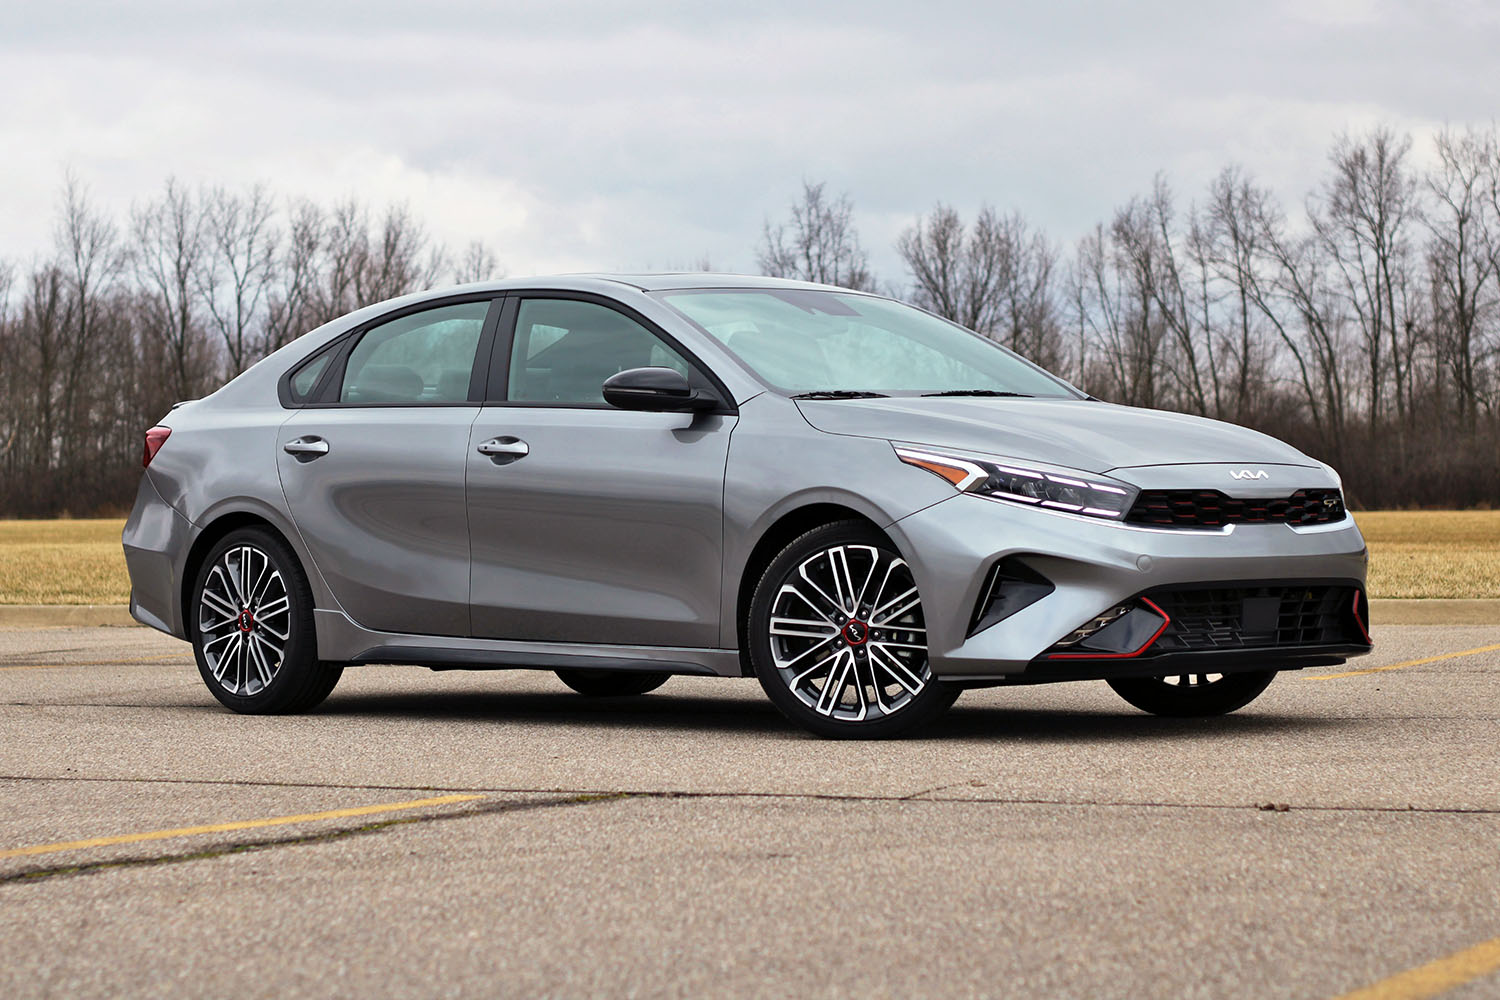 2022 Kia Forte GT in gray parked with denudate trees in the distance